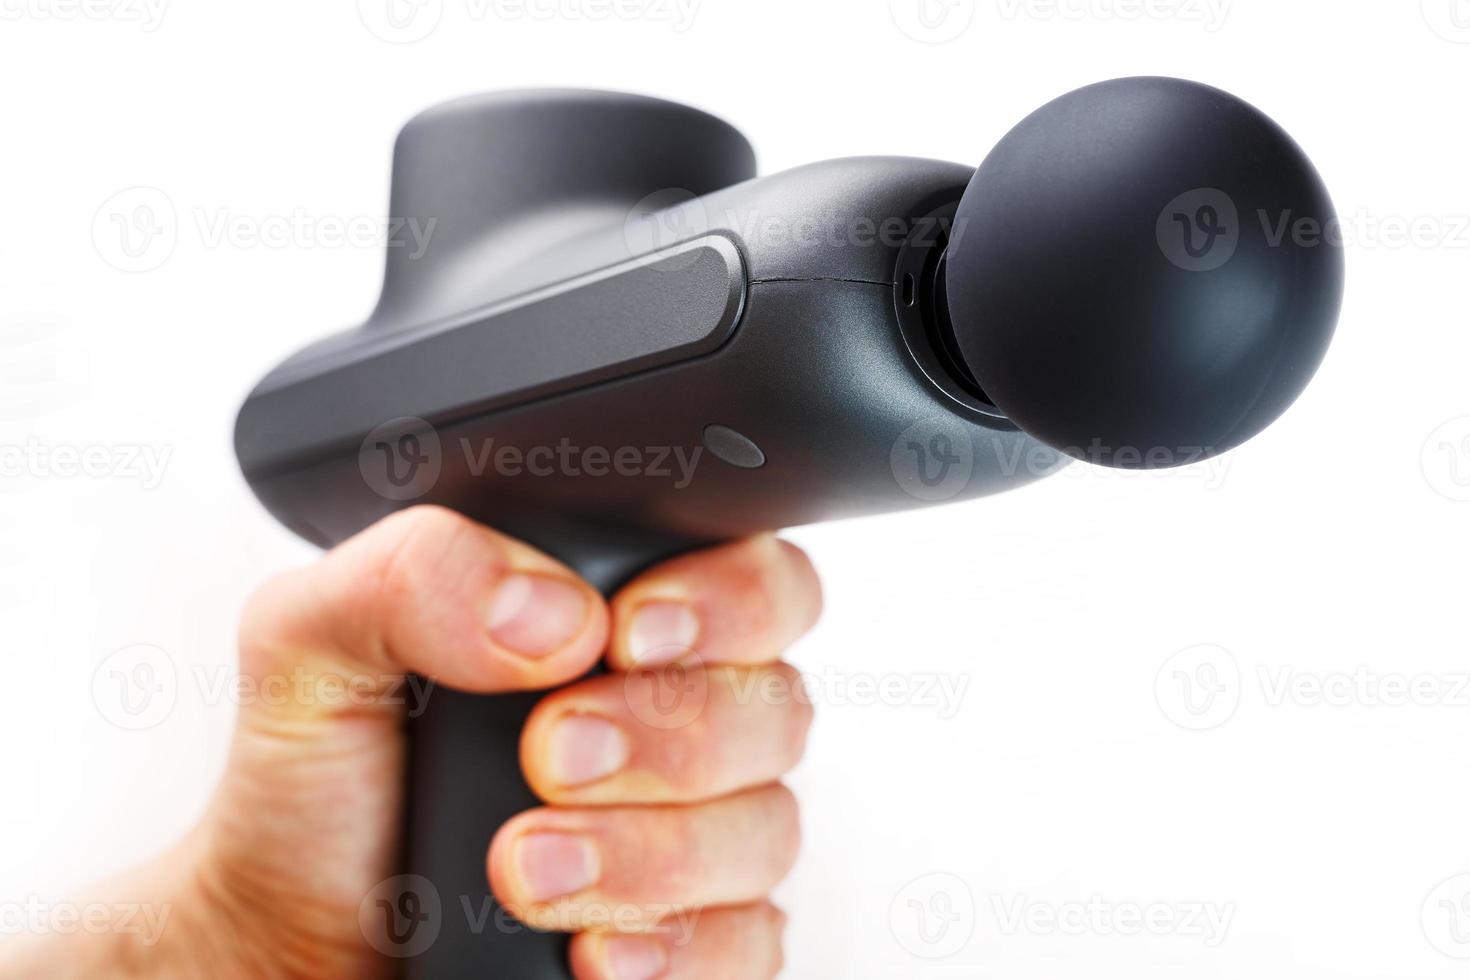 Manual electric body massager in hand on a white background. photo